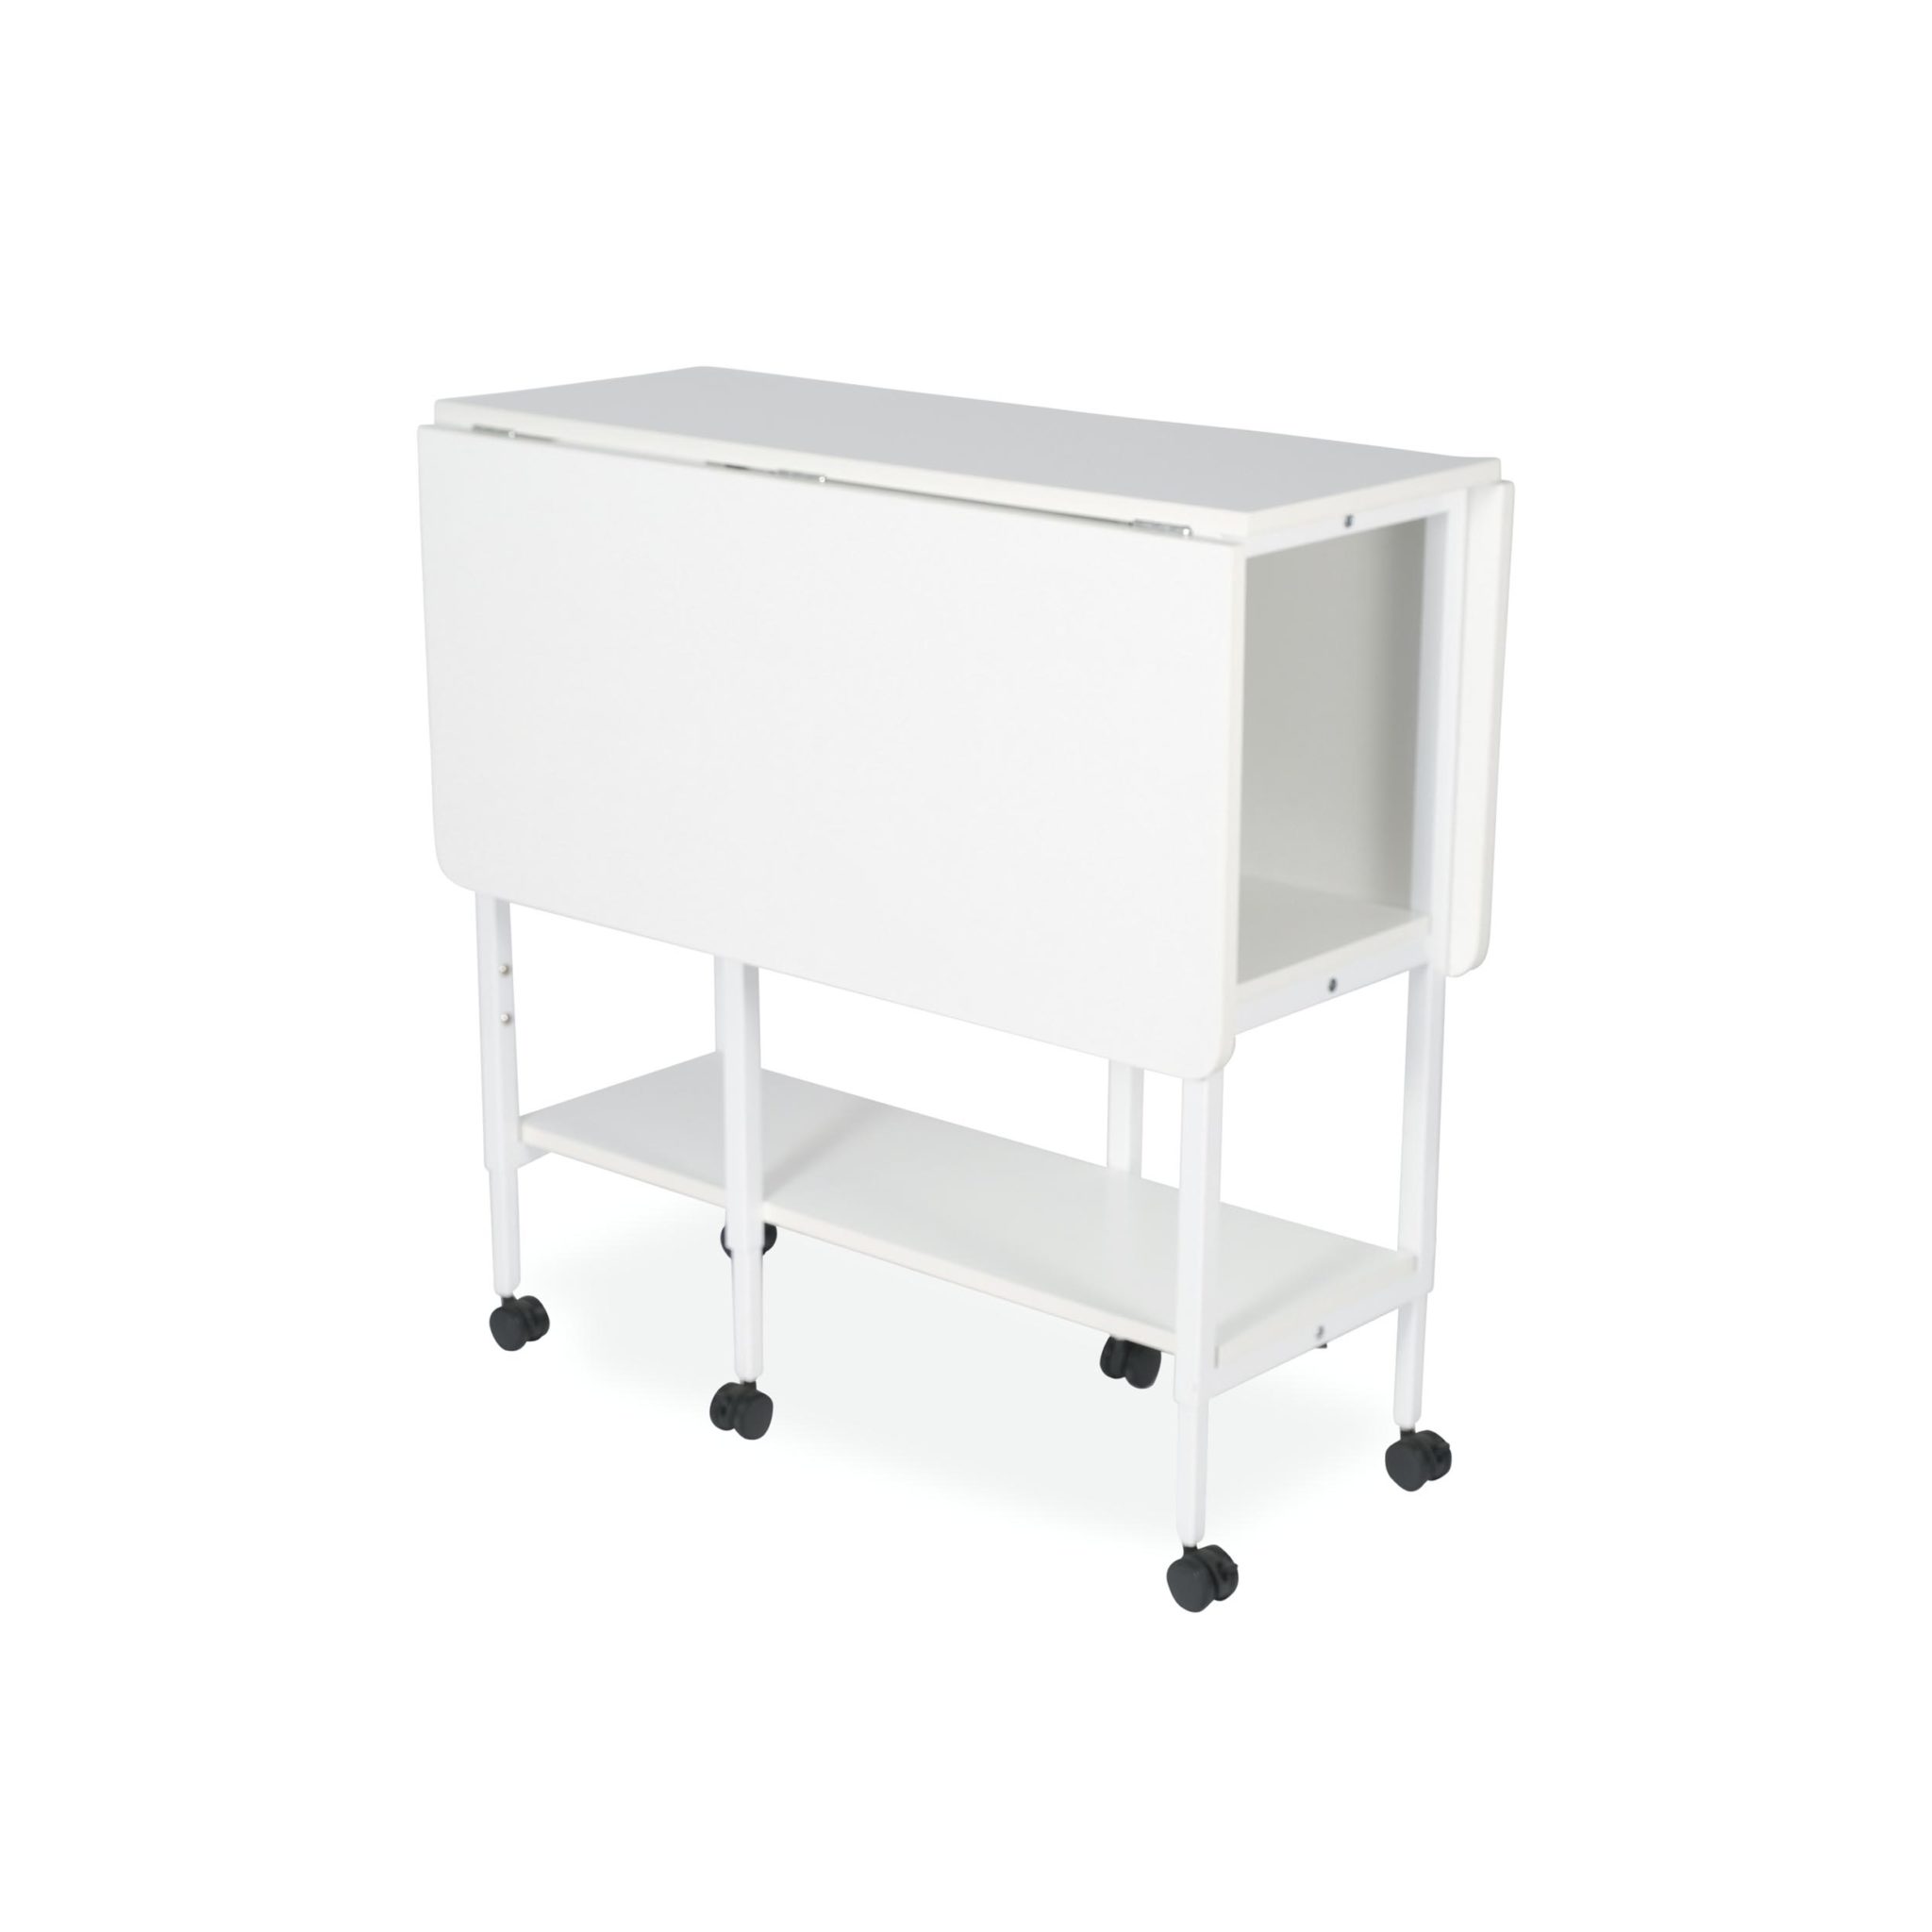 Dixie Cutting Table is the signature height-adjustable cutting table by Arrow Sewing Furniture highlighted an expansive 49″ x “37 work surface.